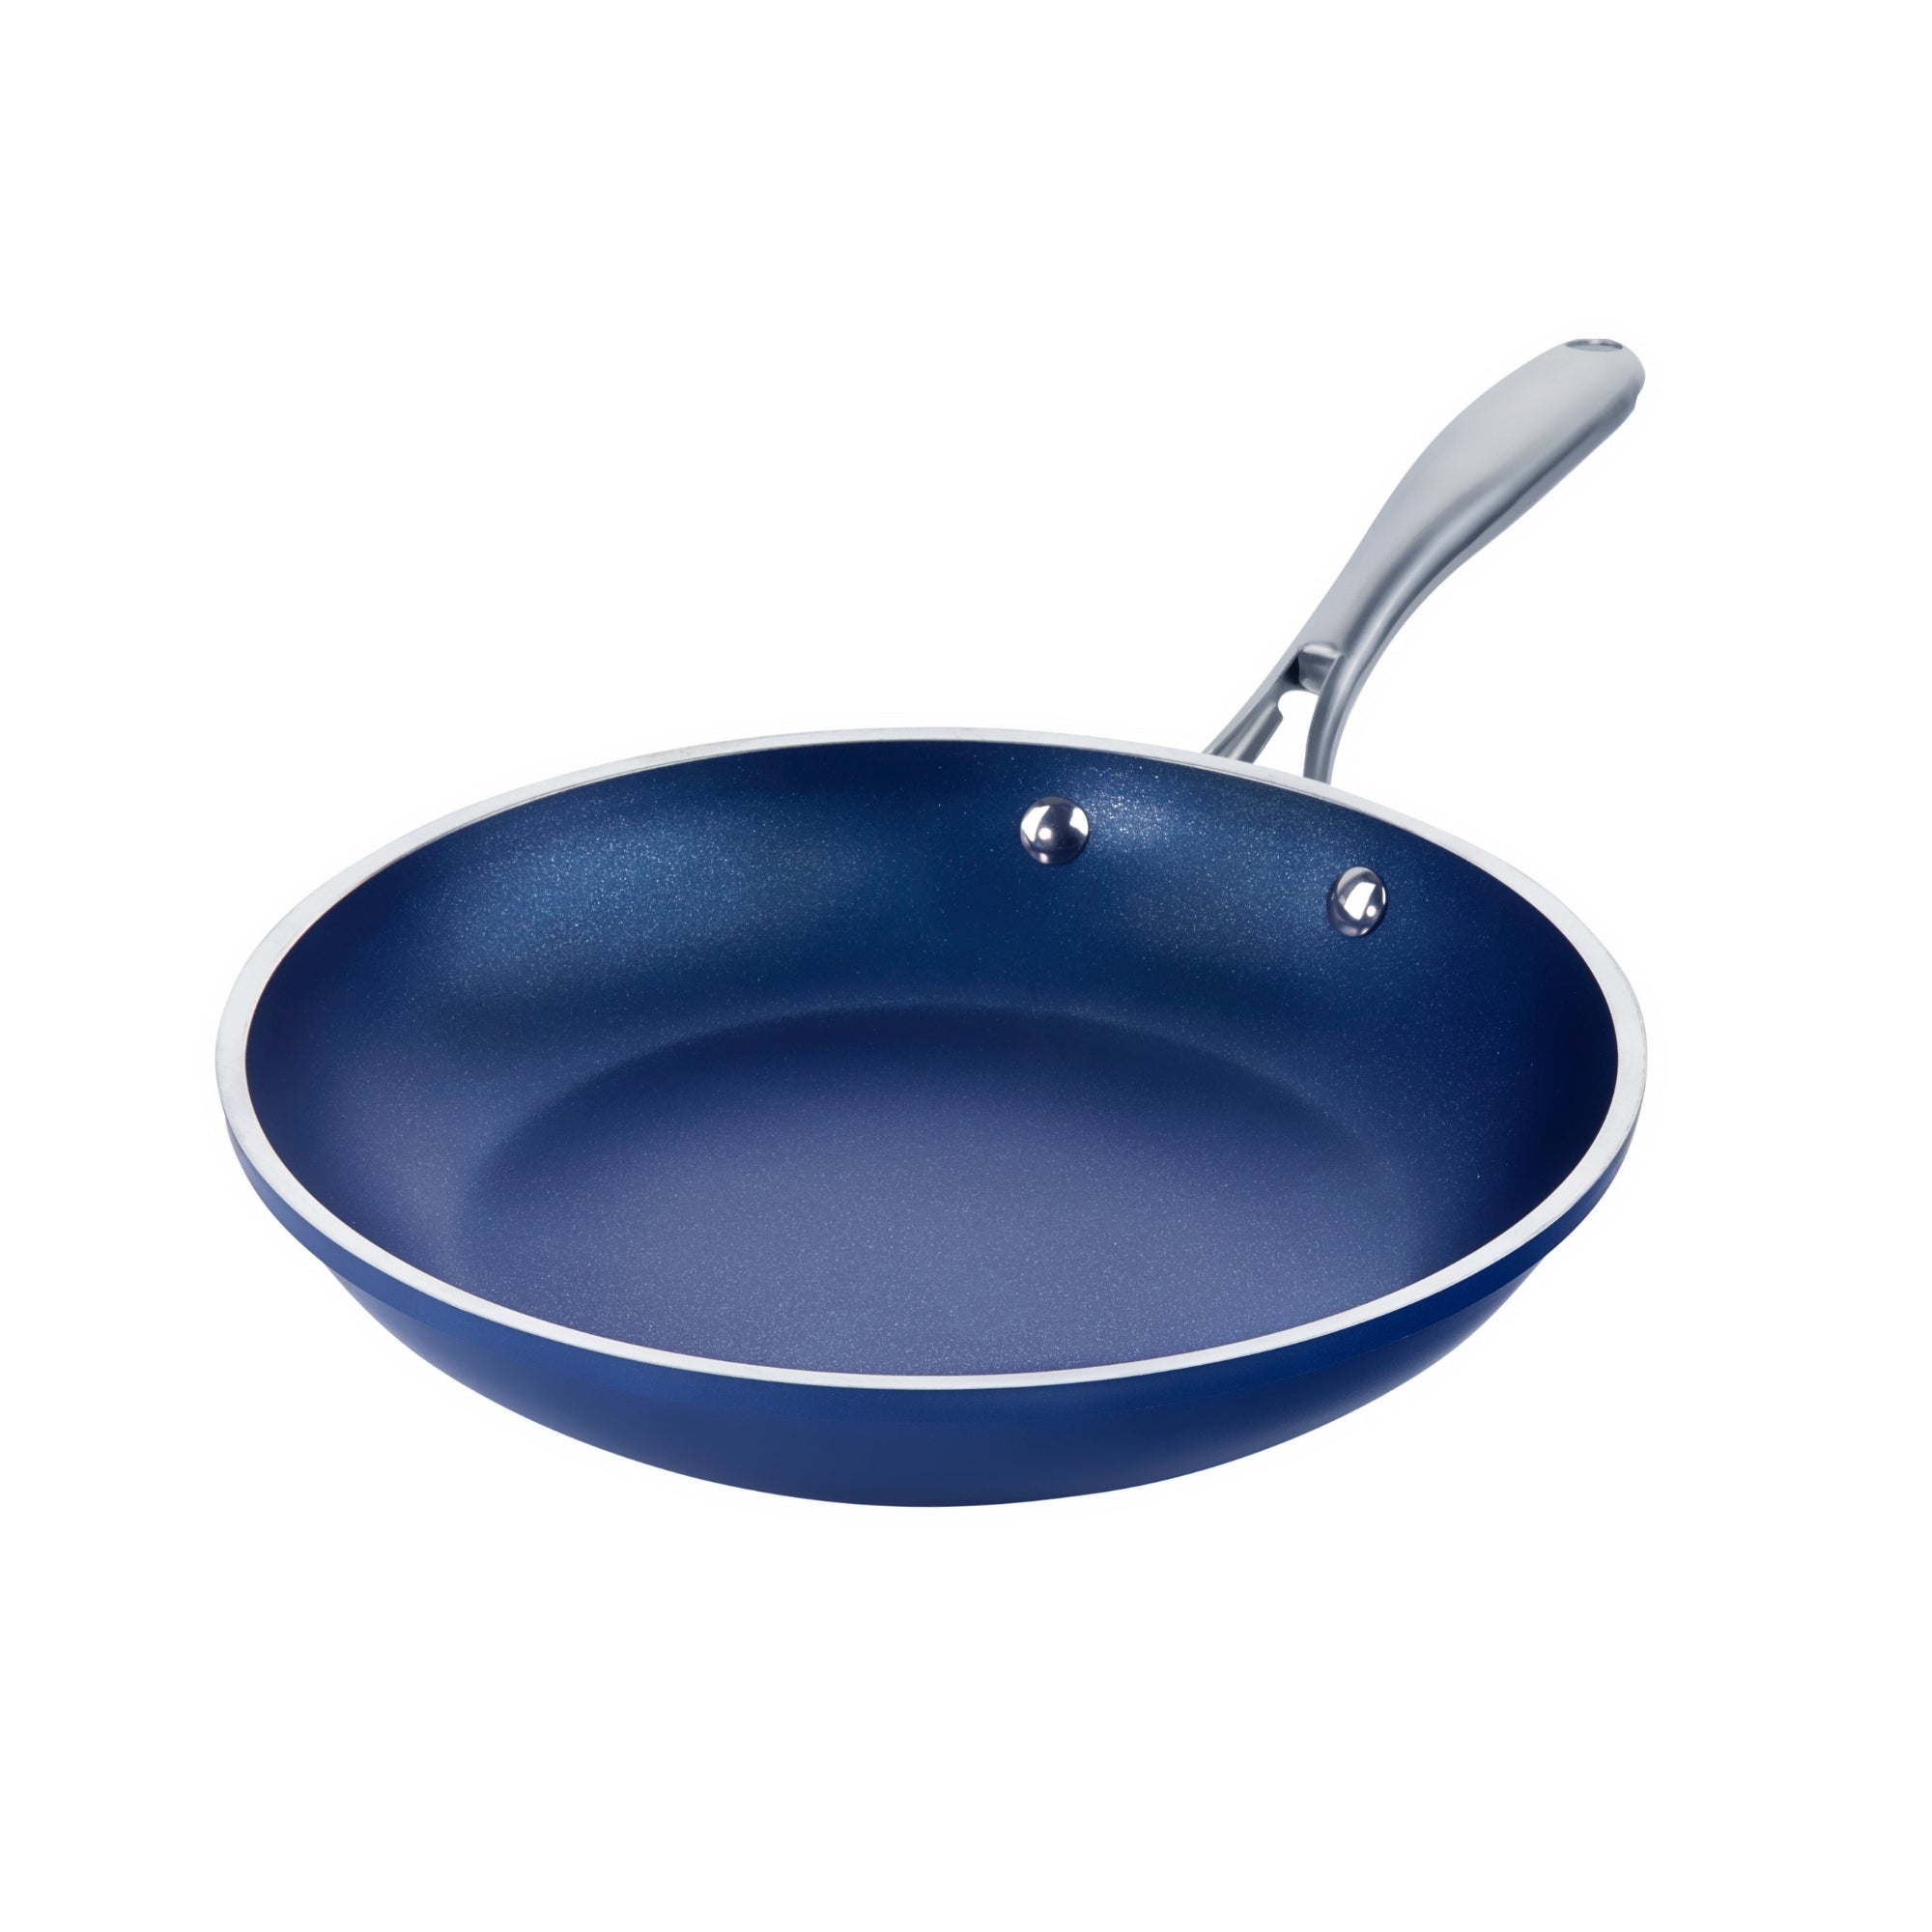 Granitestone 10 Inch Stainless Steel Non Stick Frying Pan, Blue,  Induction/Oven/Dishwasher Safe